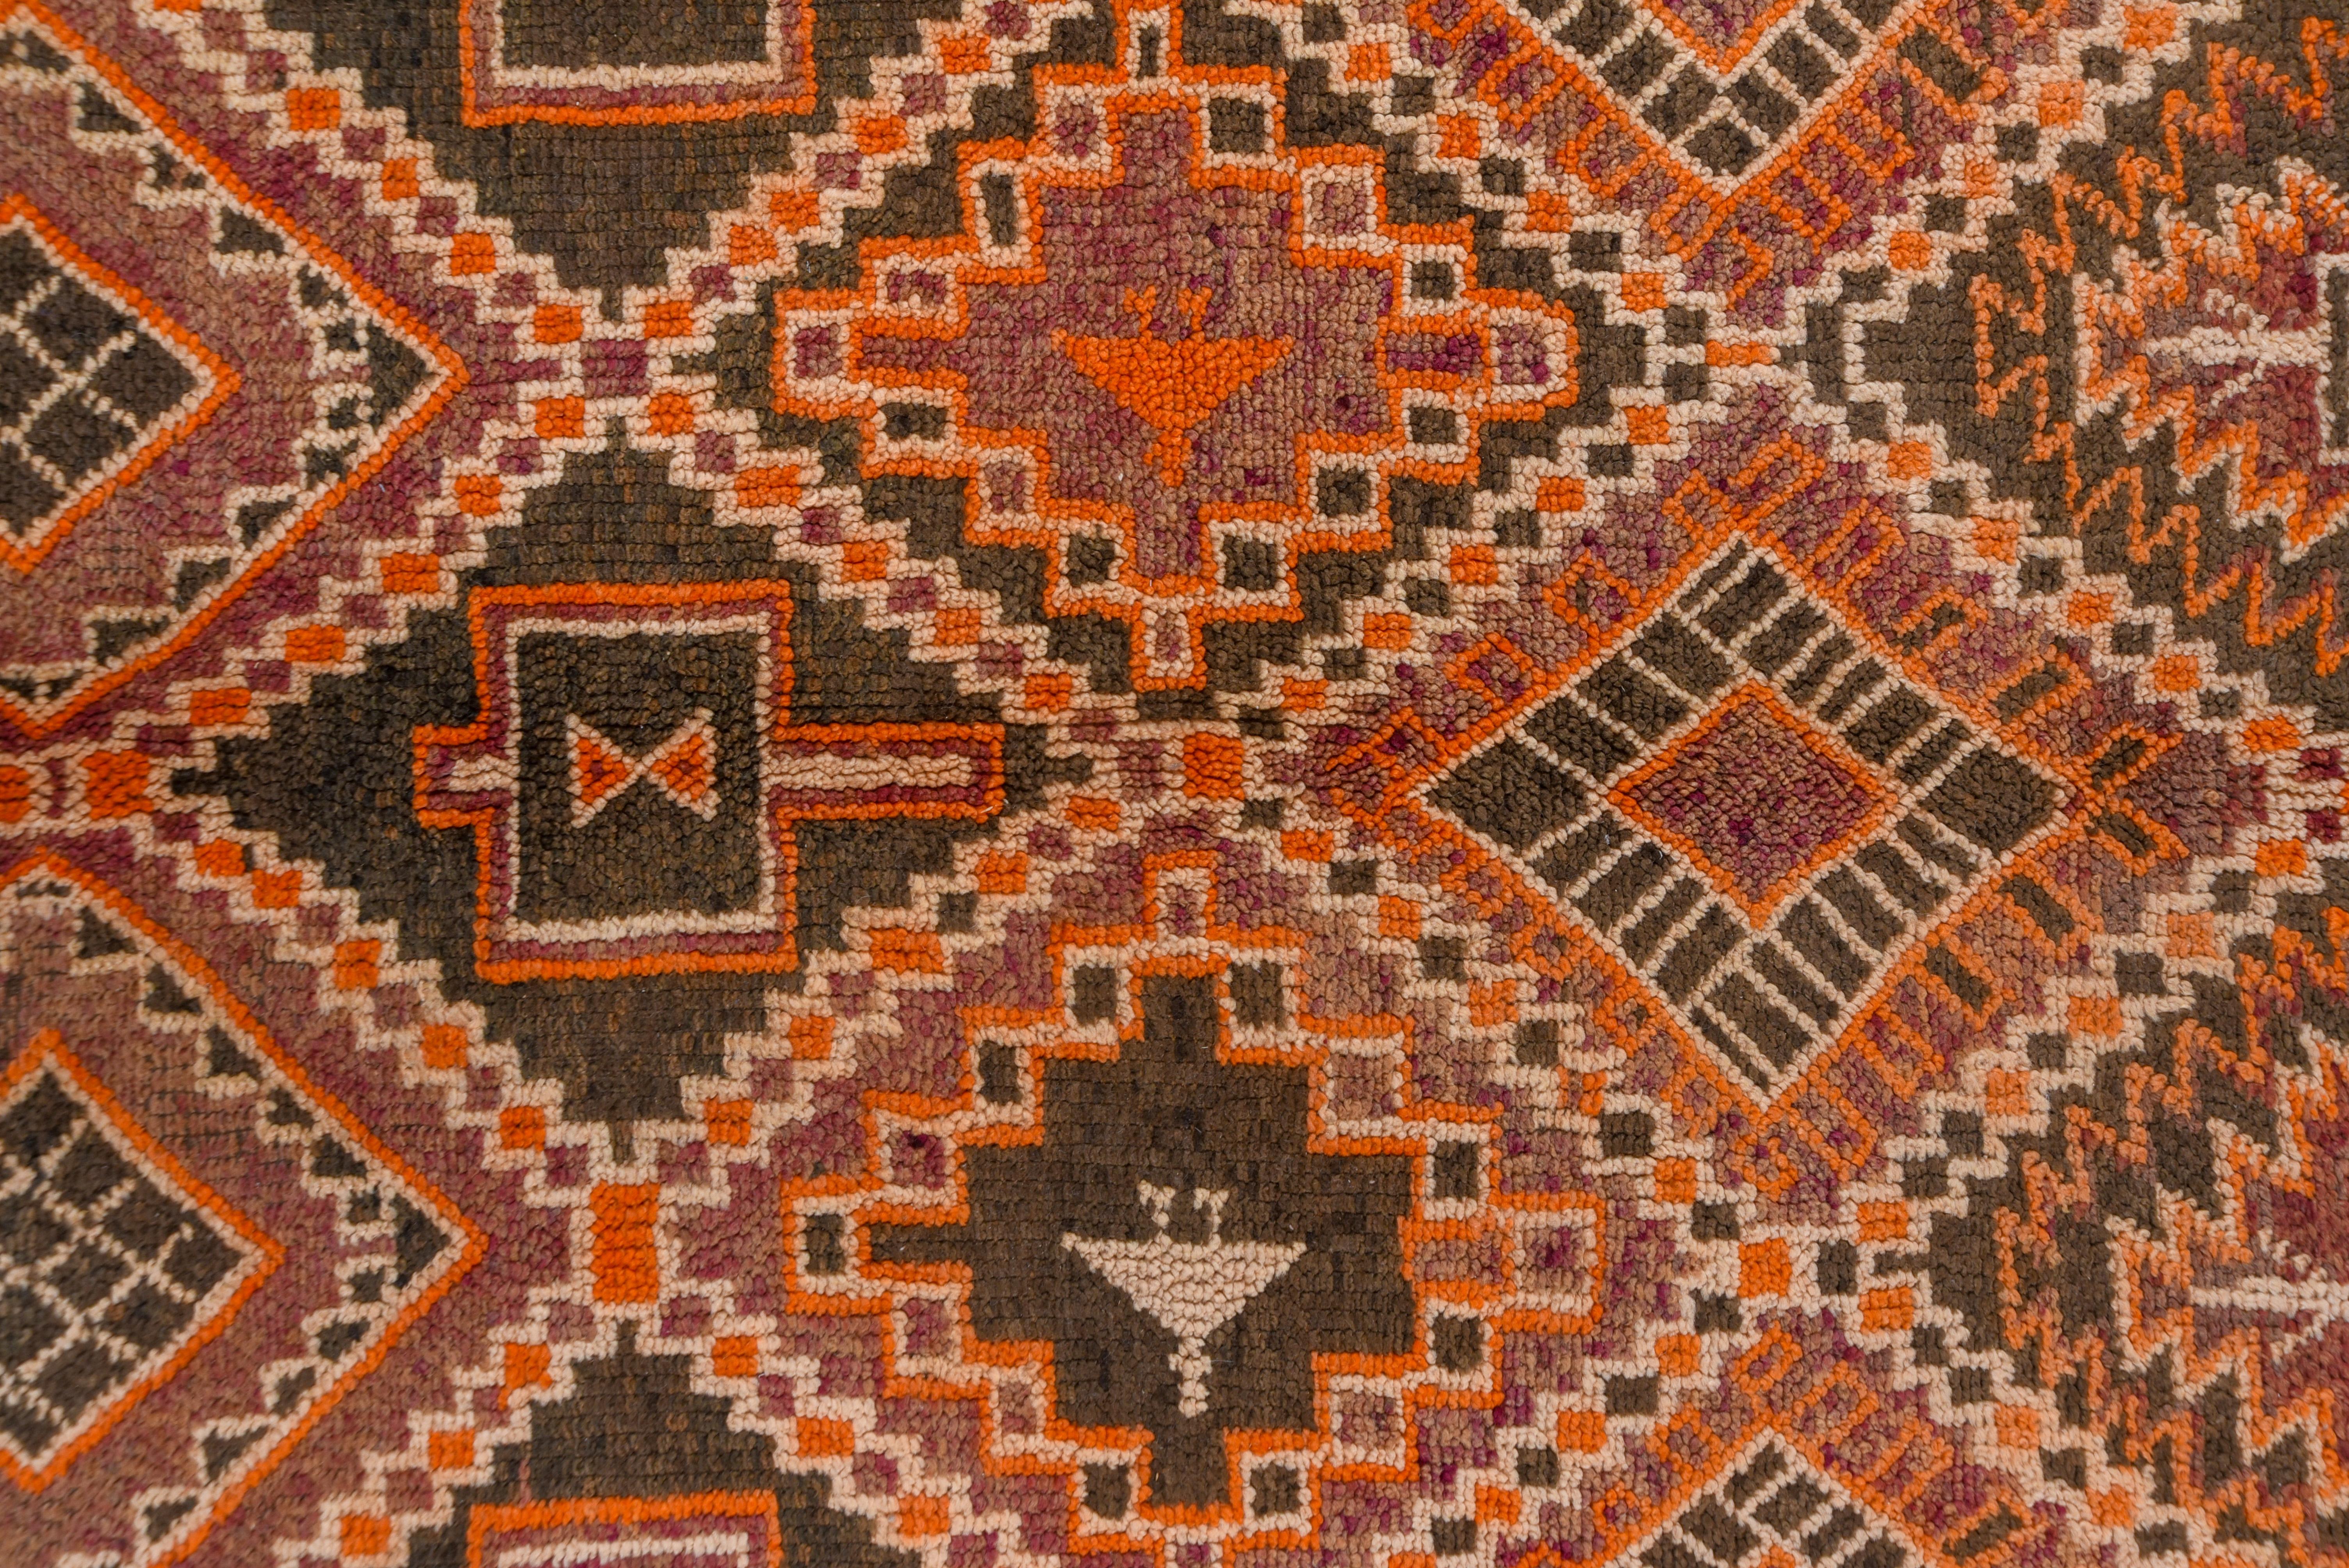 Wool Vintage Tribal Moroccan Azilal Gallery Carpet, Orange Brown and Purple Tones For Sale